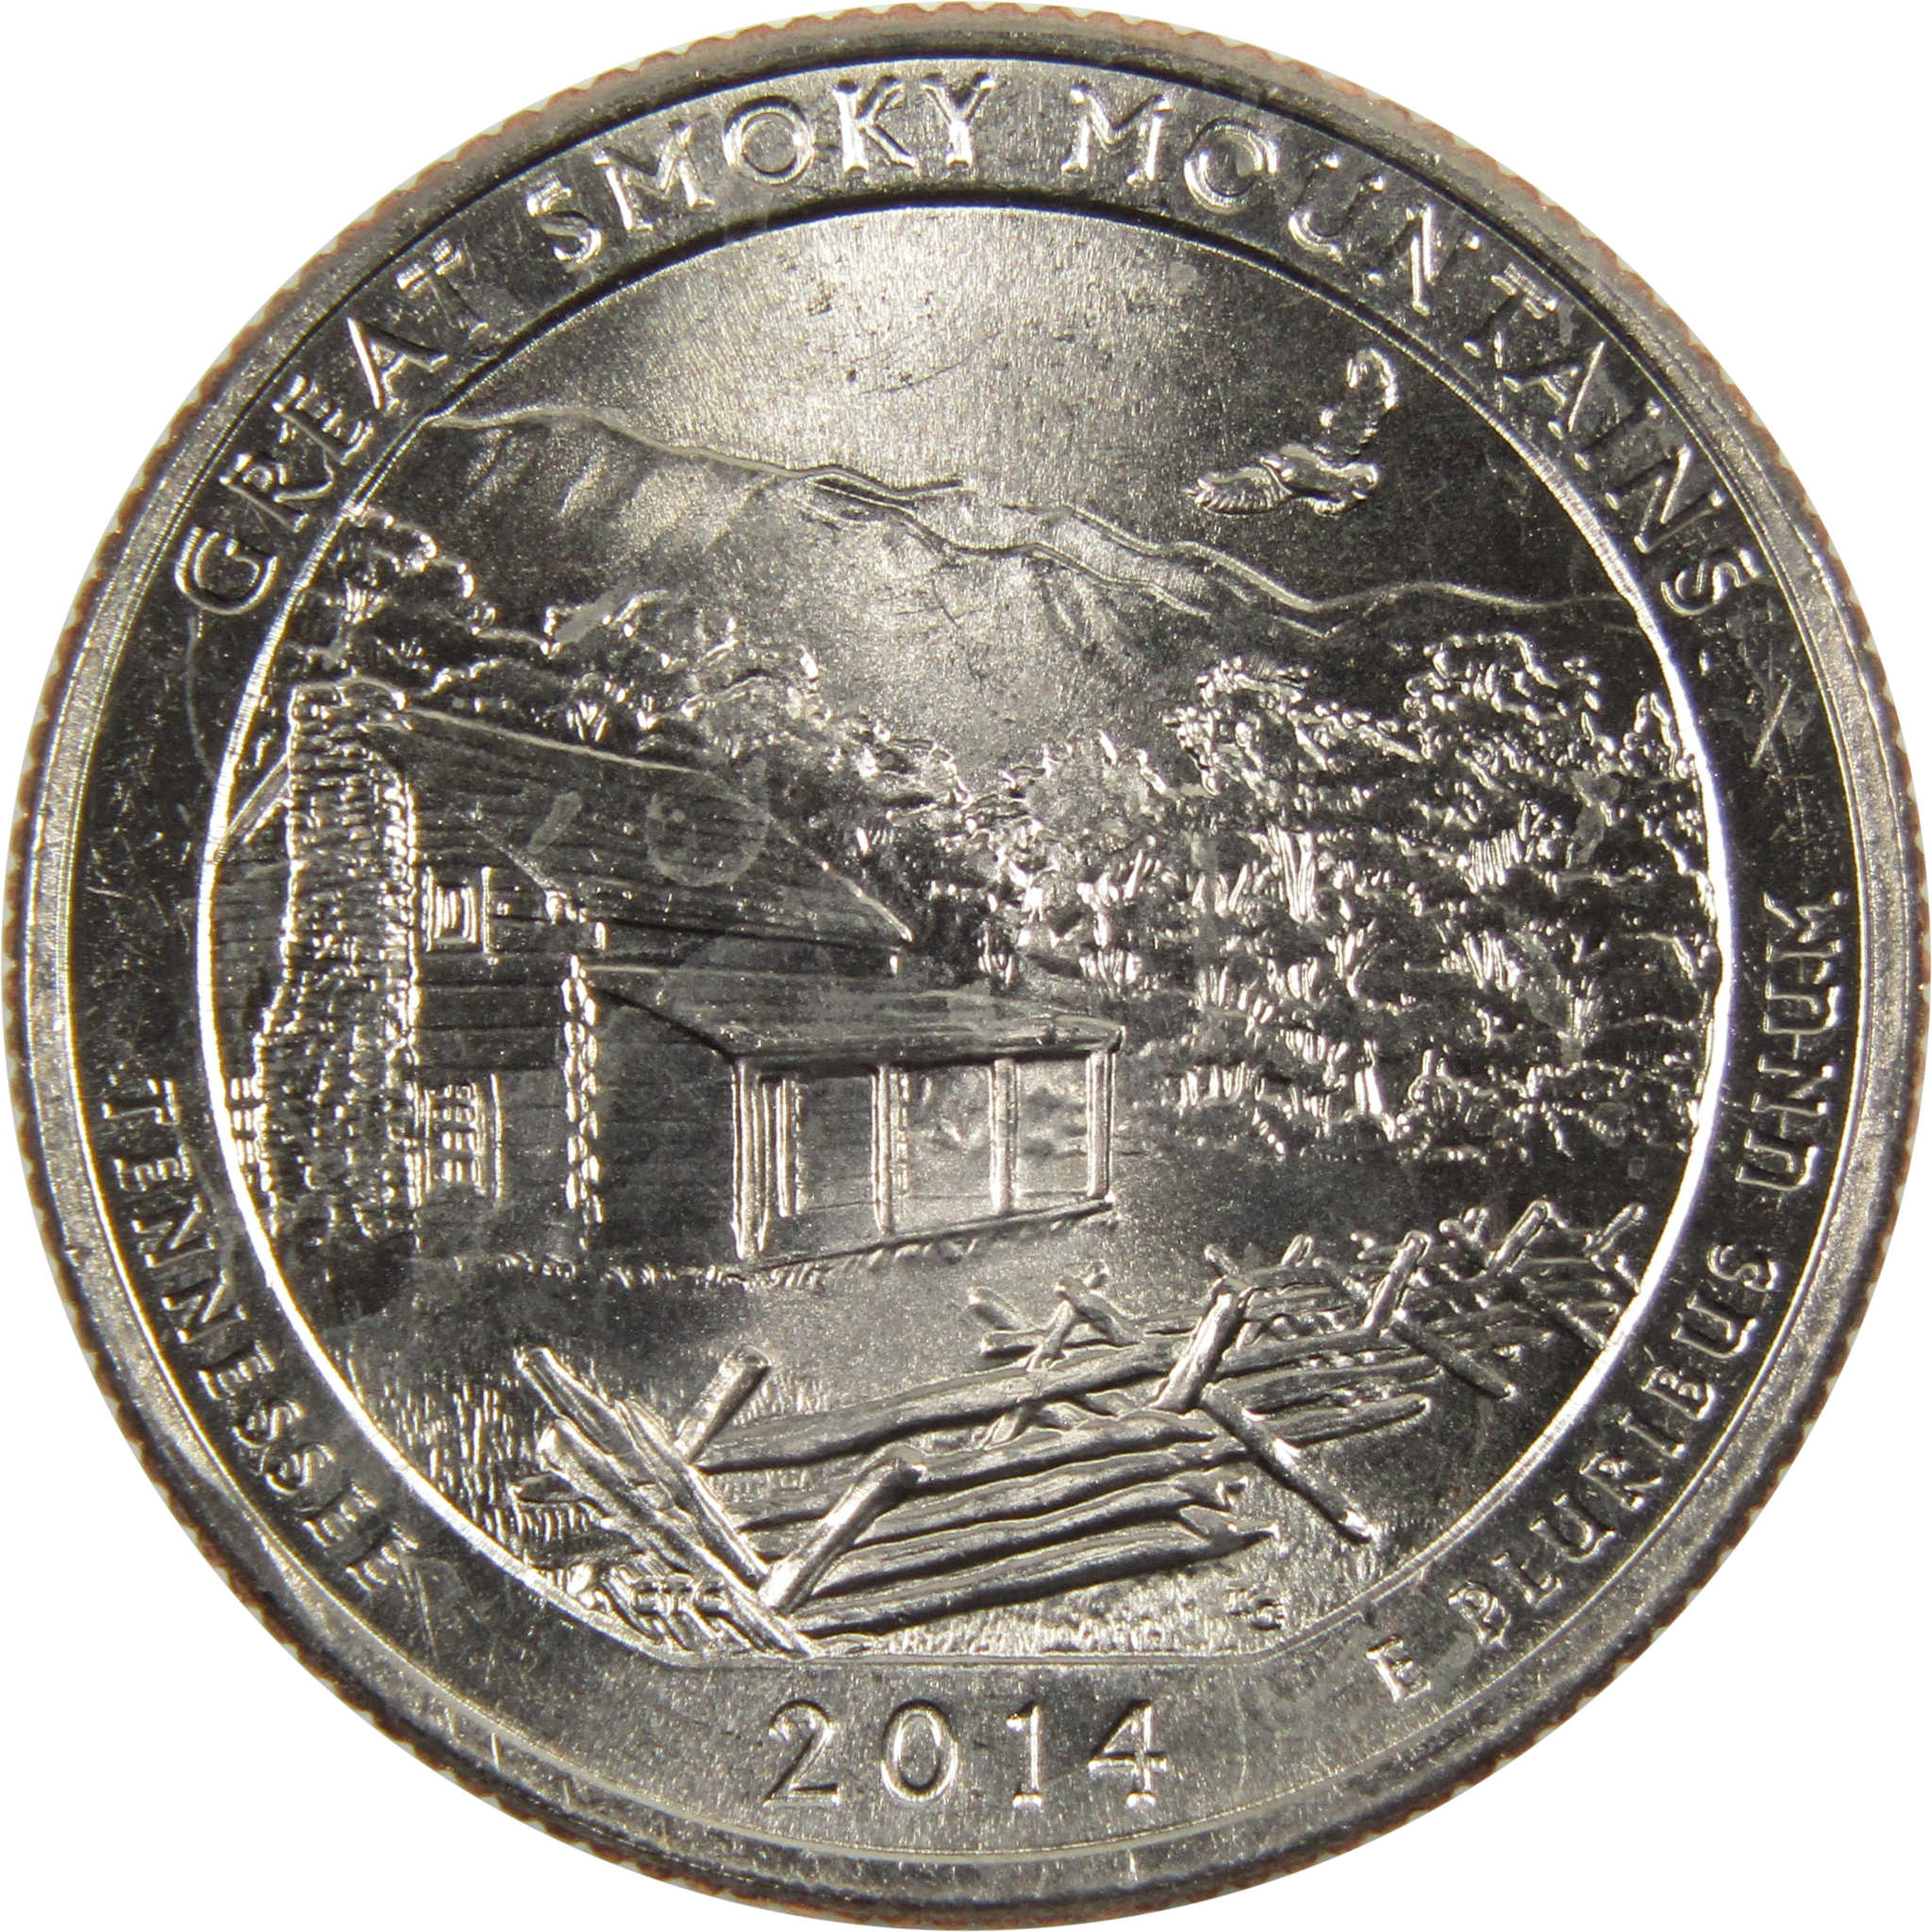 2014 P Great Smoky Mountains National Park Quarter Uncirculated Clad